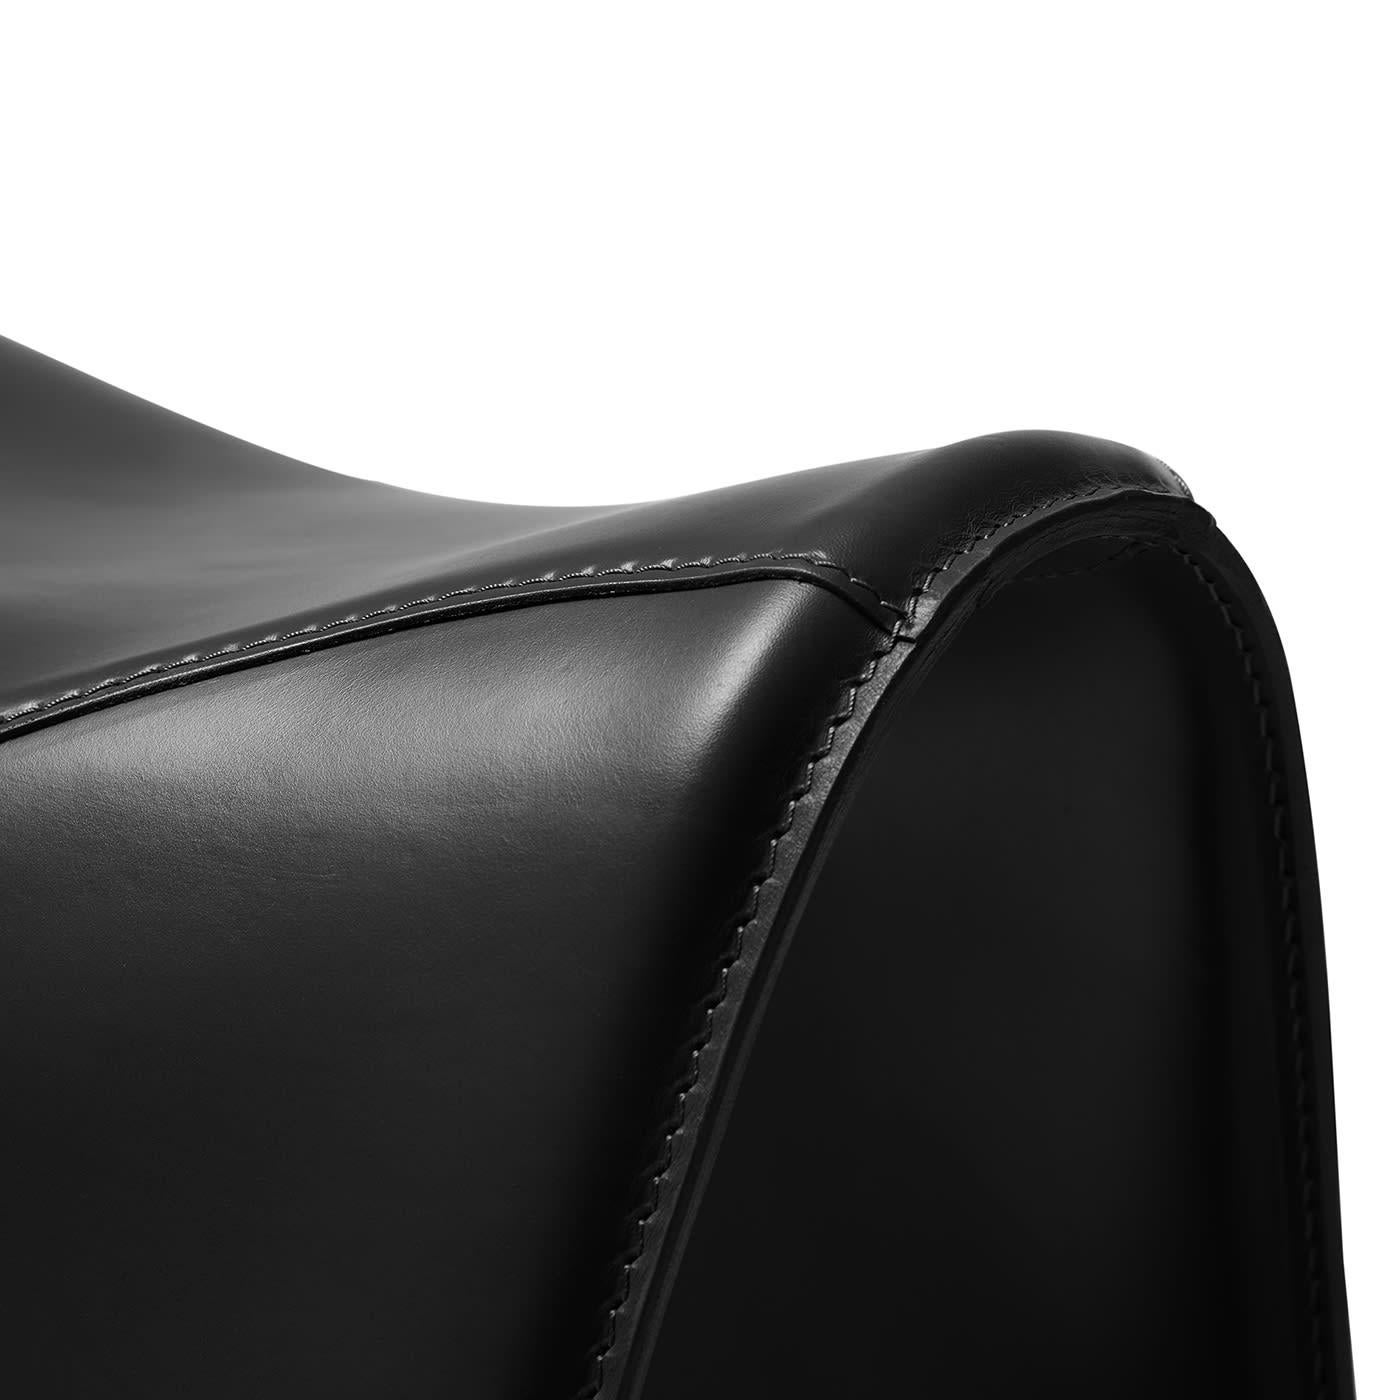 An artful take on horseback saddles, this stool was designed to provide a comfortable seating experience while playing a precious evocative function. Its sleigh structure in curved steel is luxuriously enveloped by a black cover in full-grain